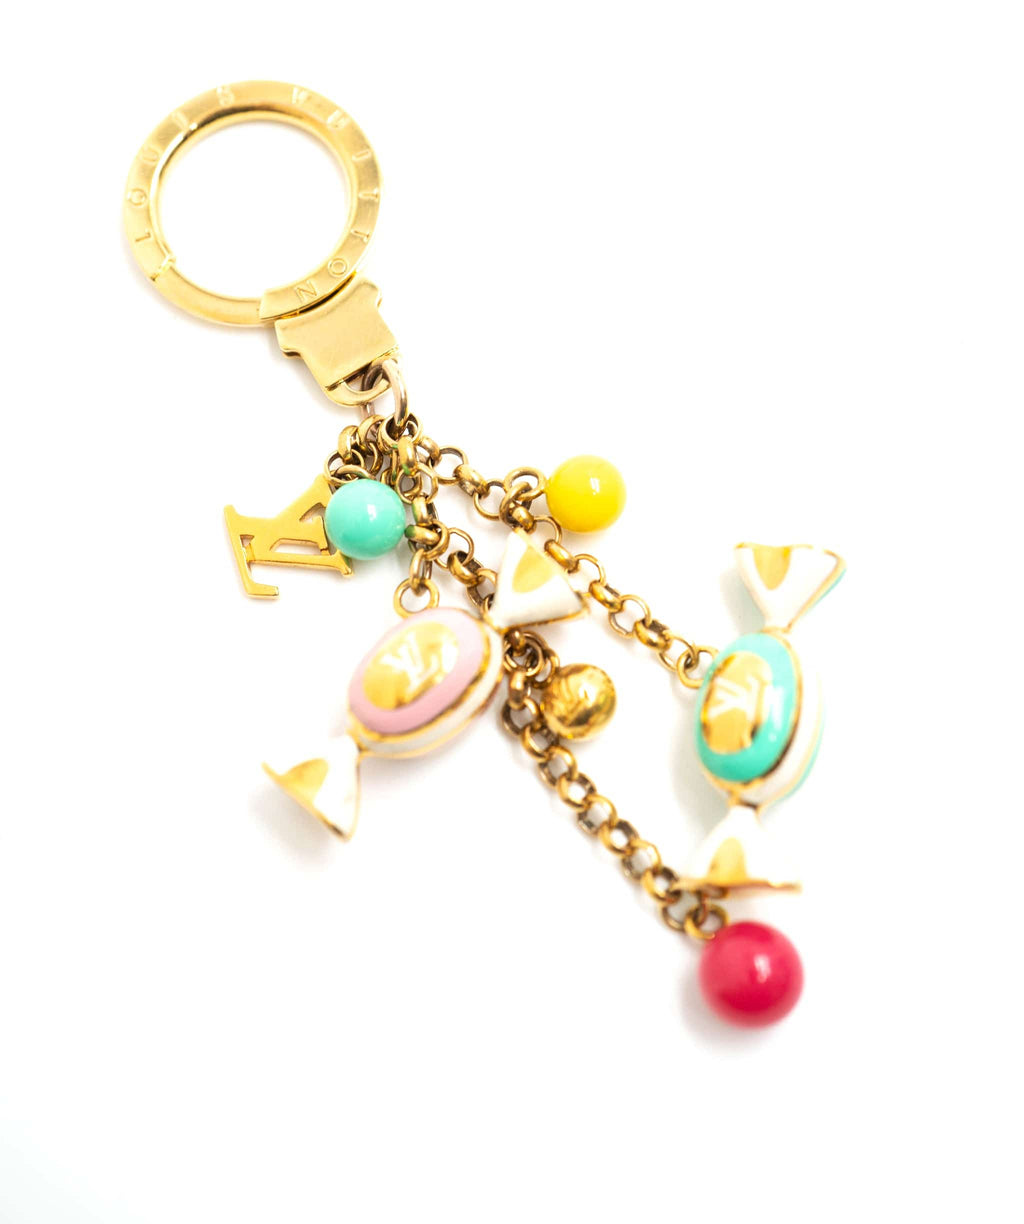 Louis Vuitton Candy Keychain & Bag Charm - Gold Keychains, Accessories -  LOU749997